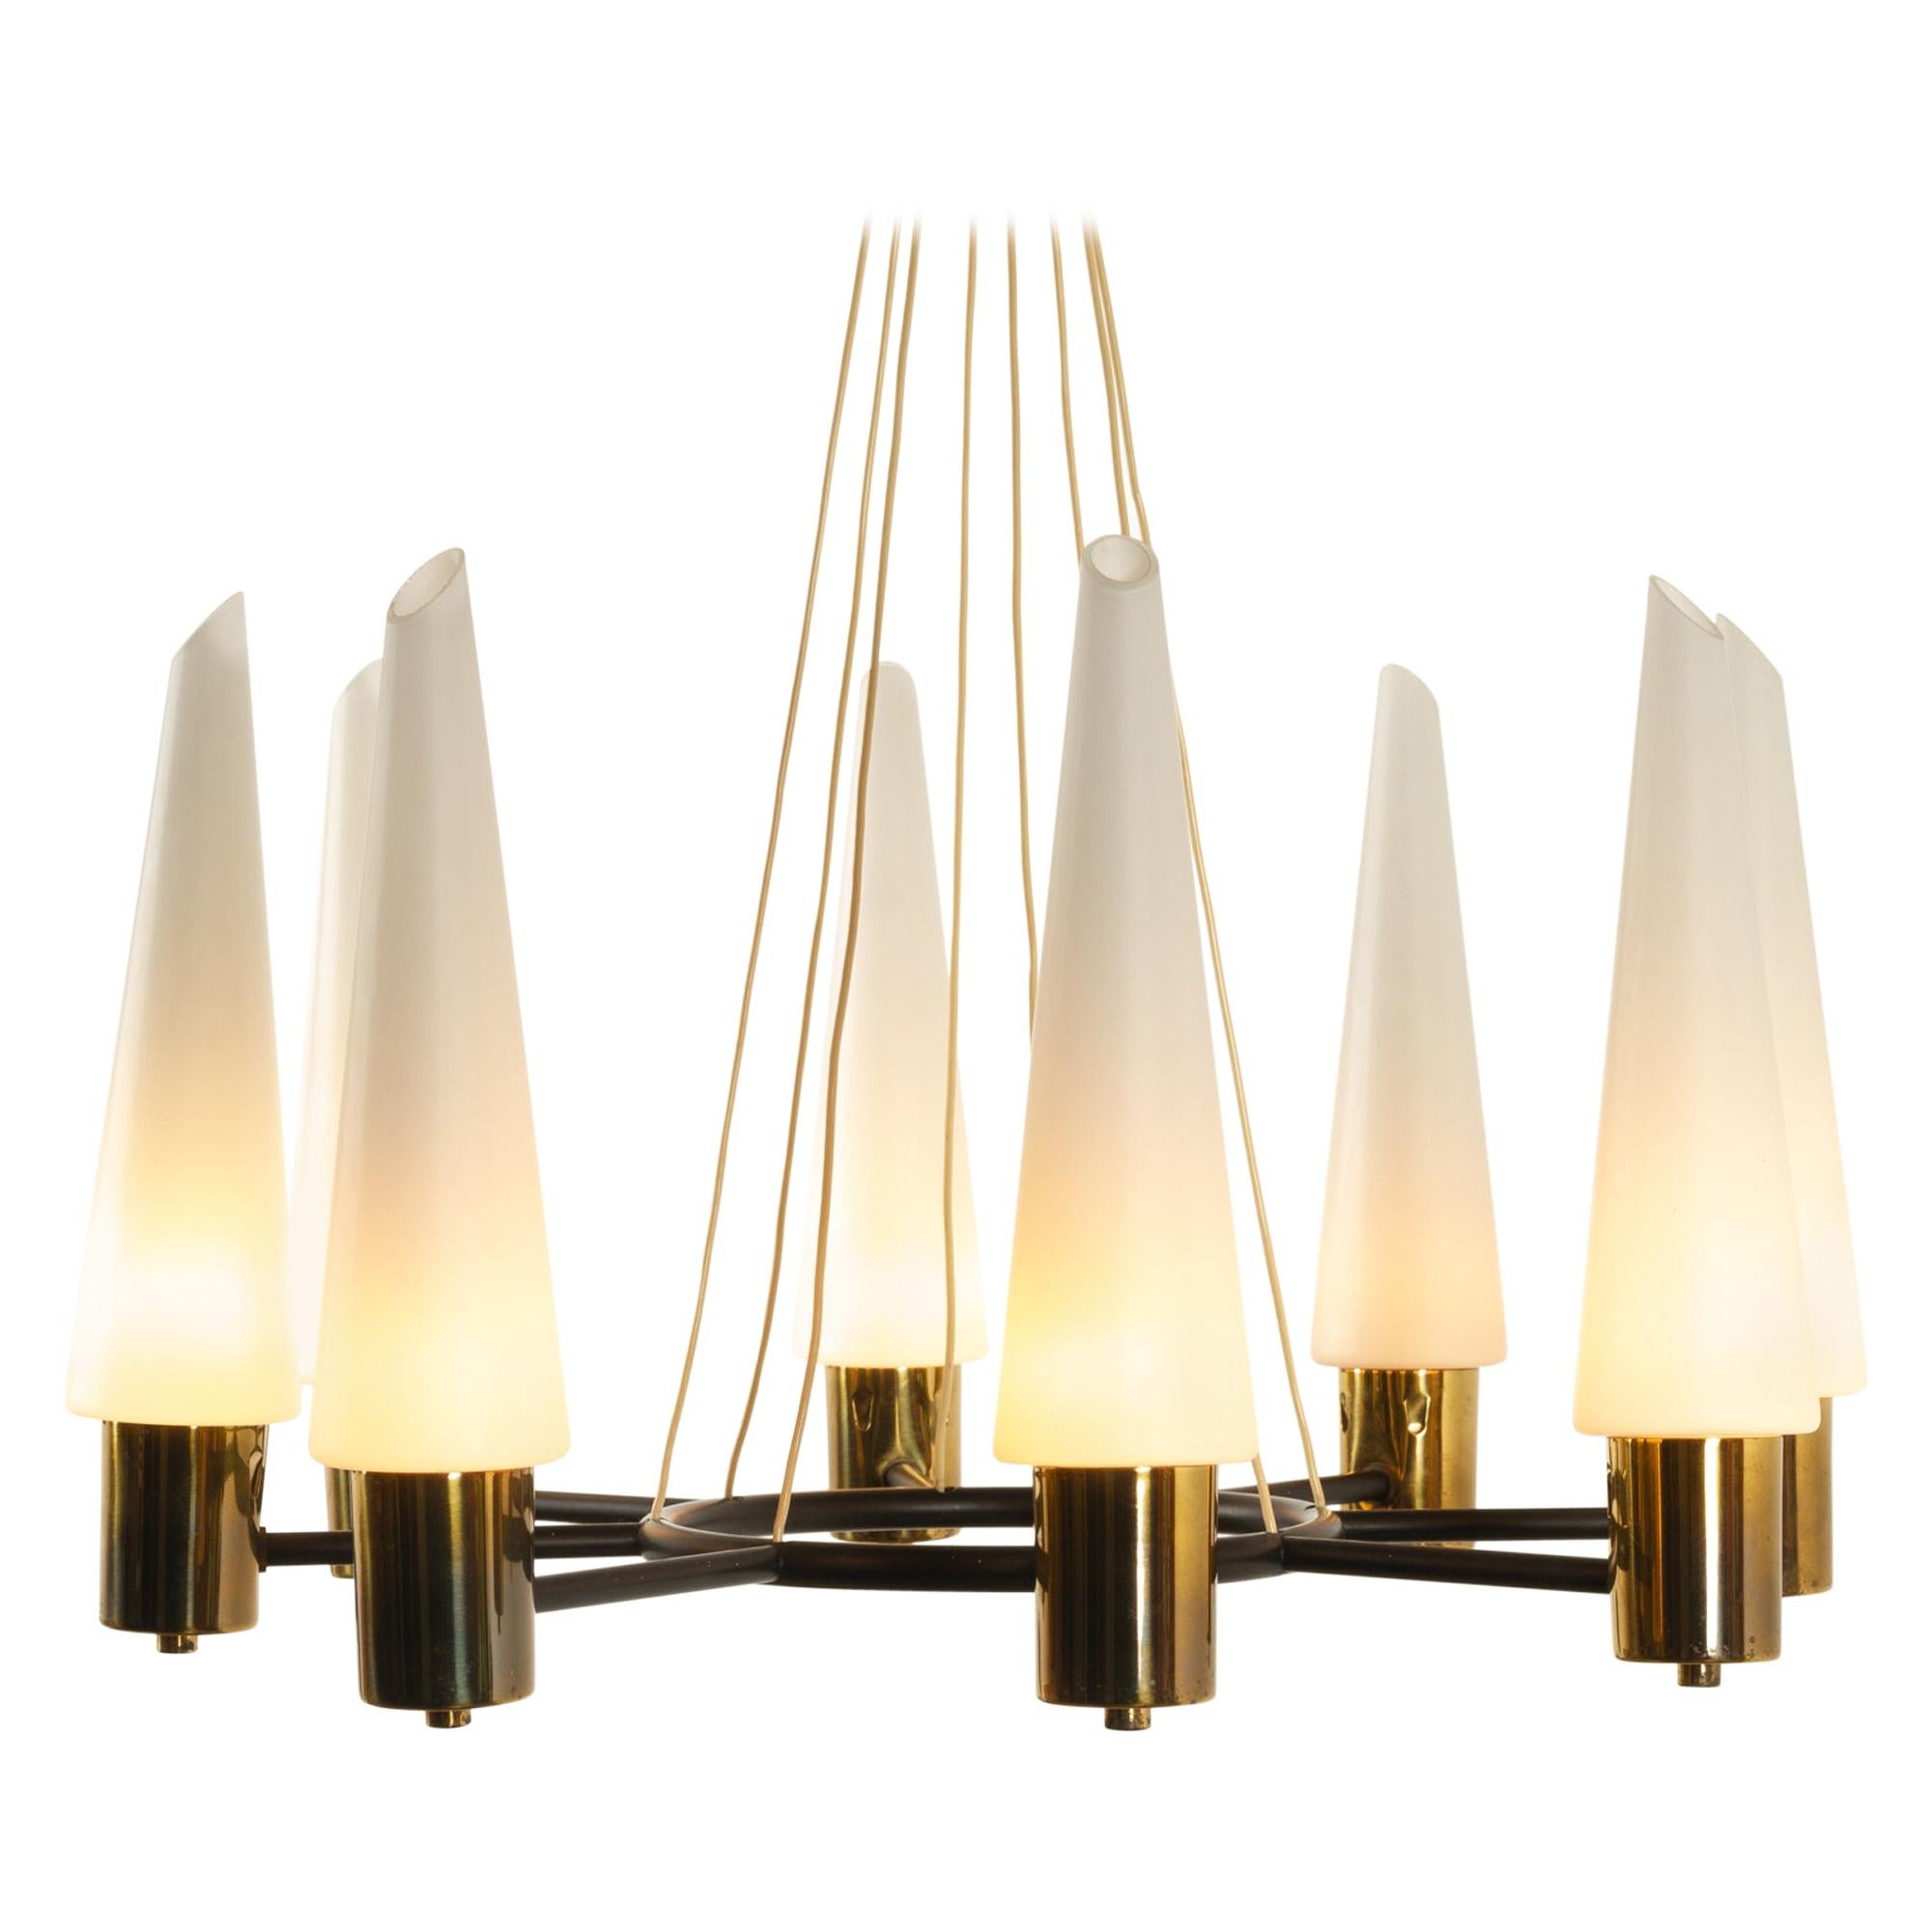 Vintage Midcentury Brass Chandelier with Opal Glass Shades, 1960s